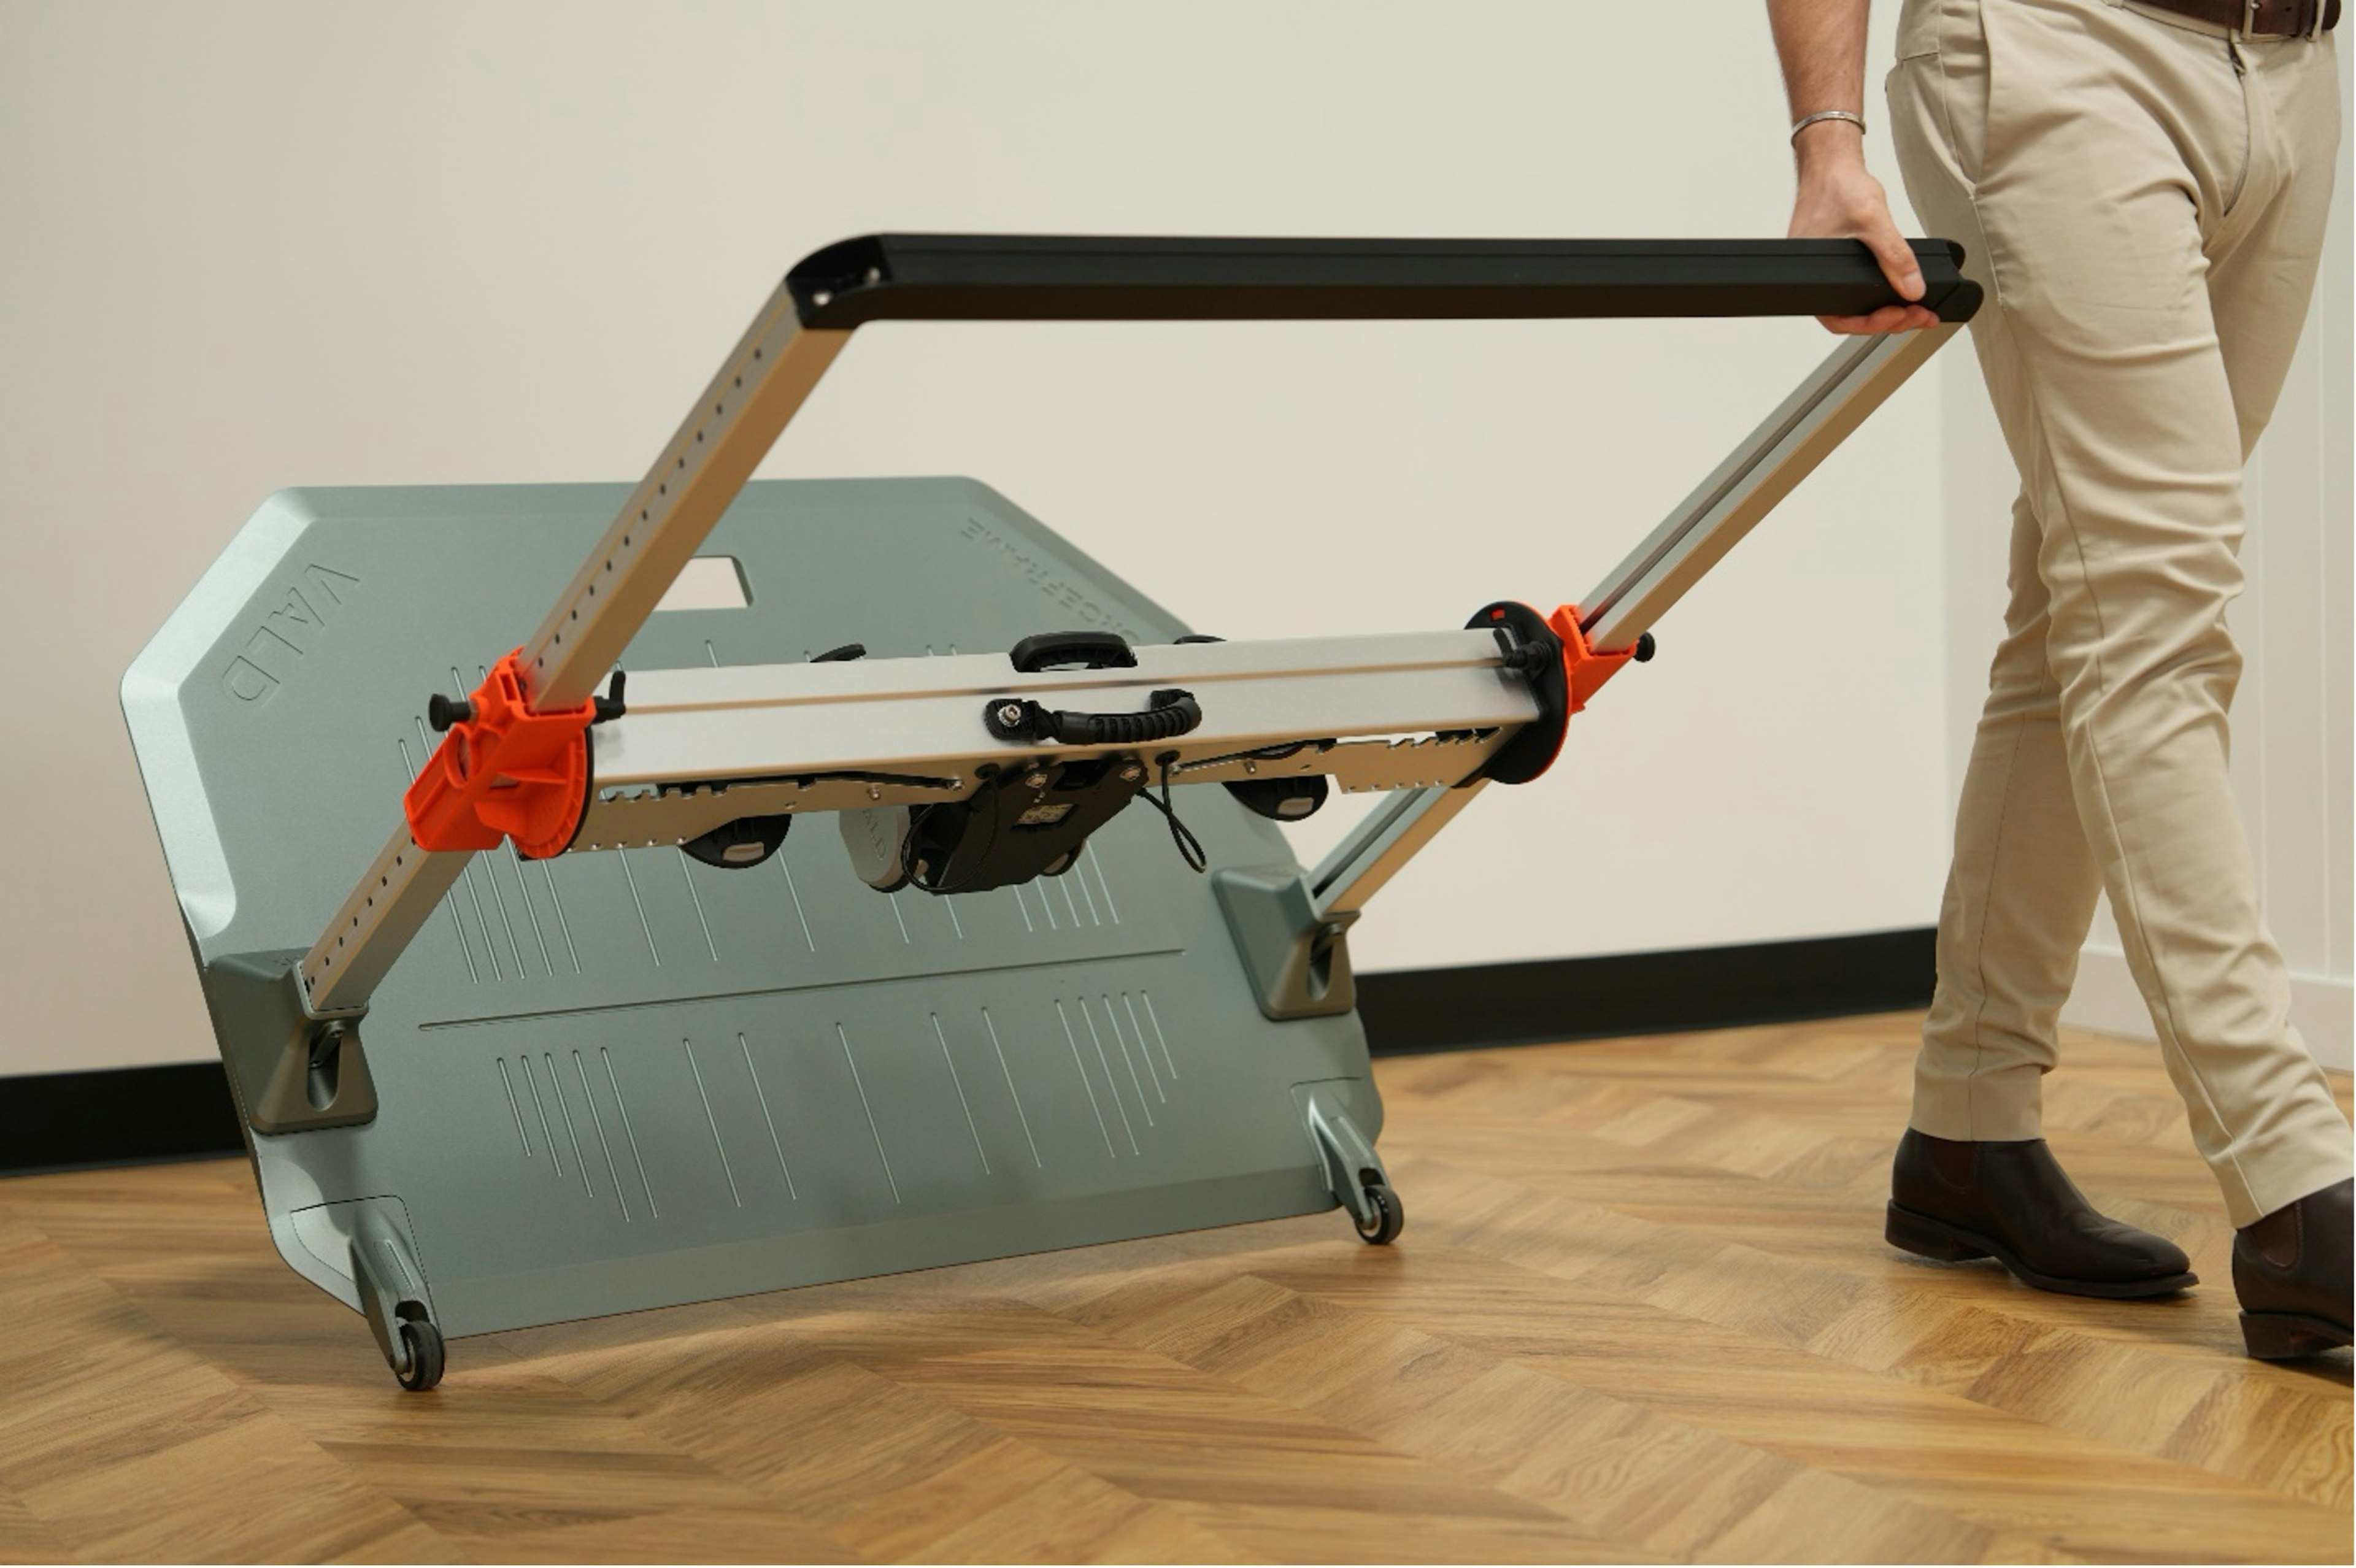 ForceFrame Max’s integrated wheels make it easy to move around a clinic or gym.